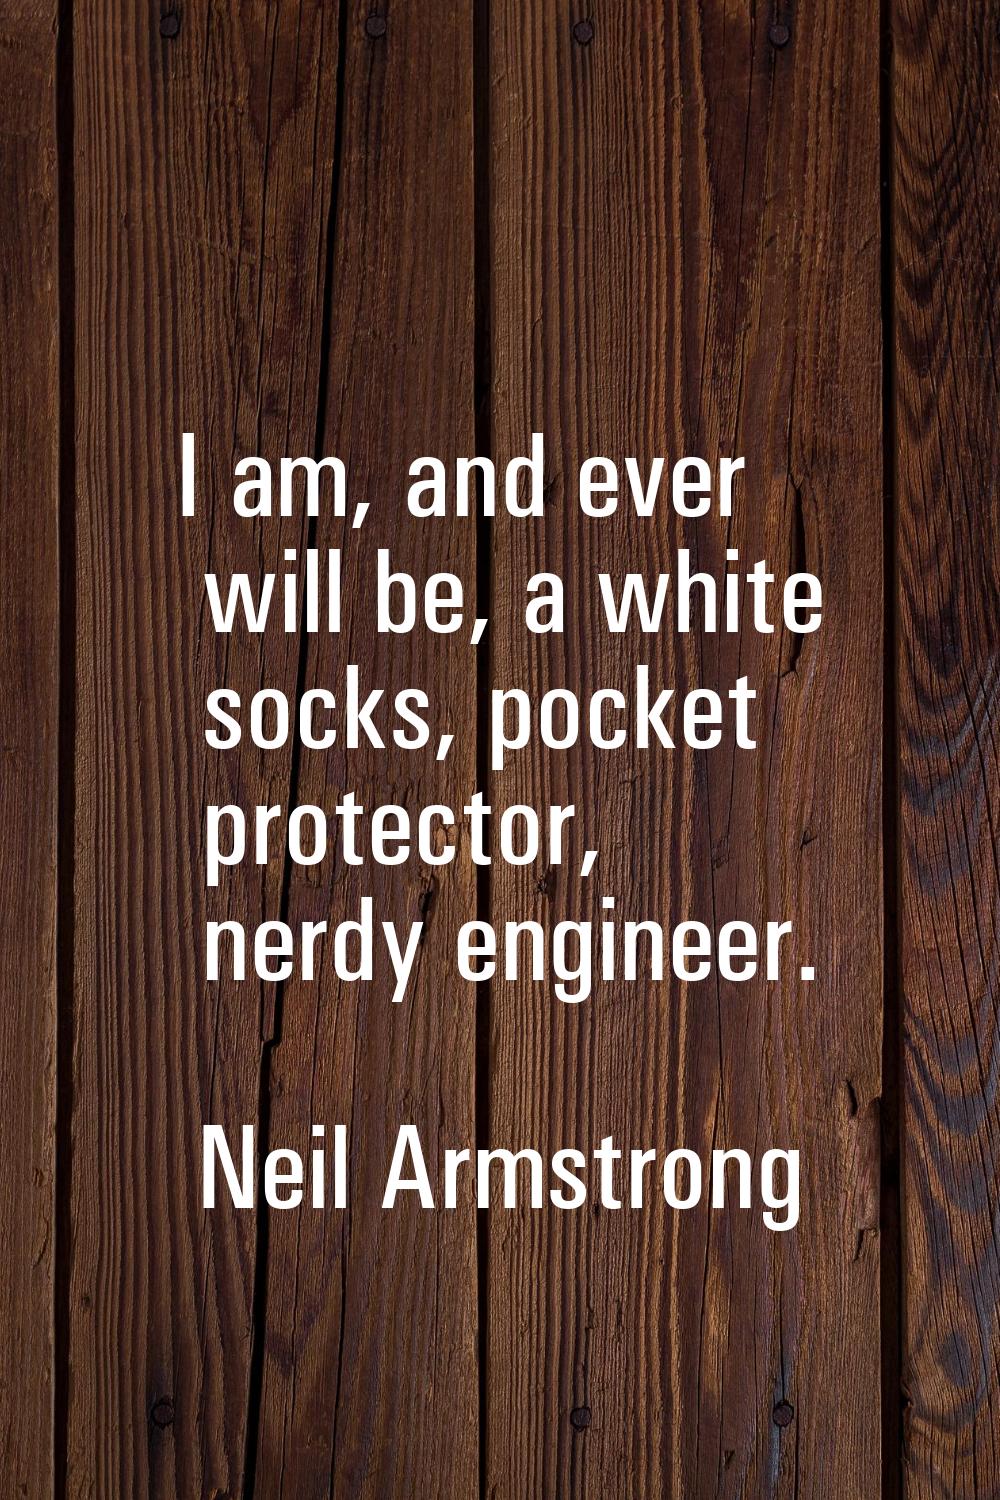 I am, and ever will be, a white socks, pocket protector, nerdy engineer.